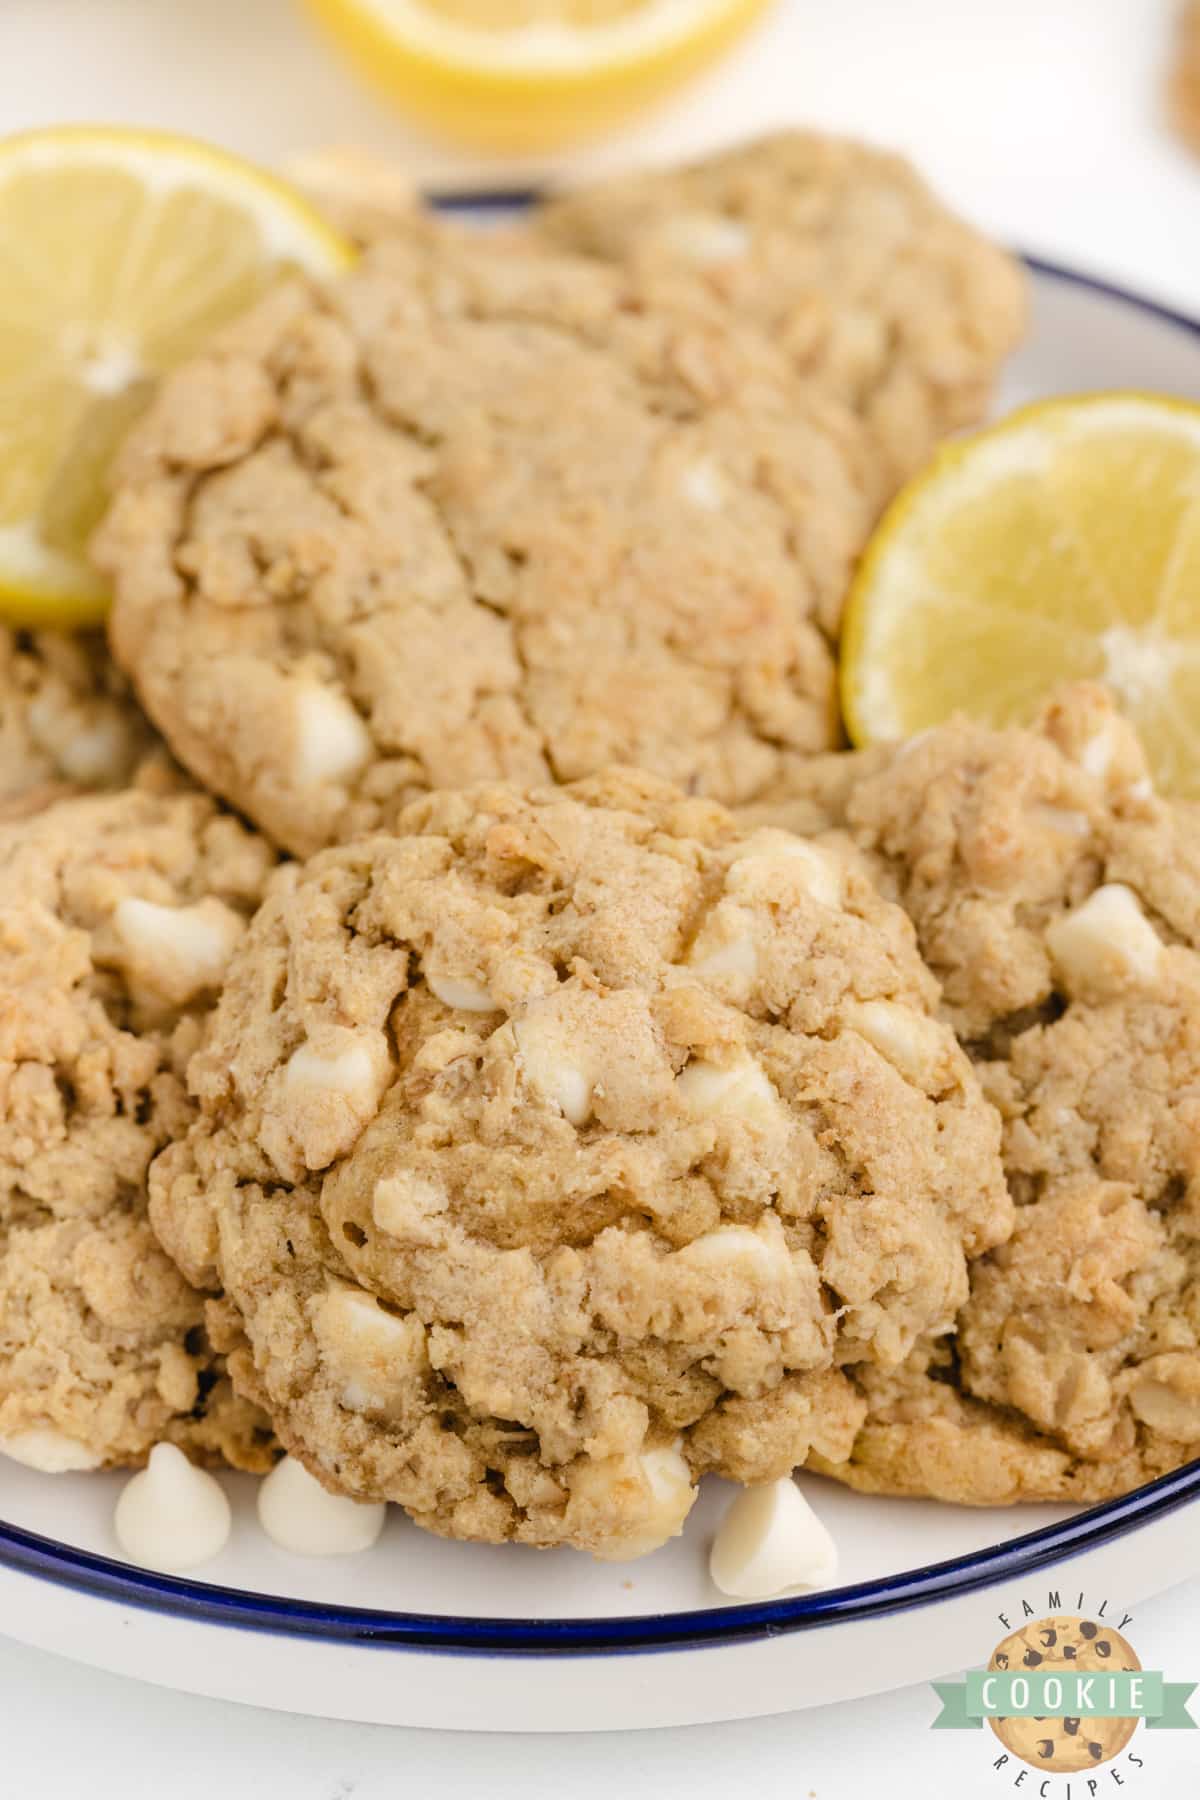 Lemon Oatmeal Cookies are soft, chewy, and made with lemon pudding mix and white chocolate chips! Easy oatmeal cookie recipe with a ton of lemon flavor!